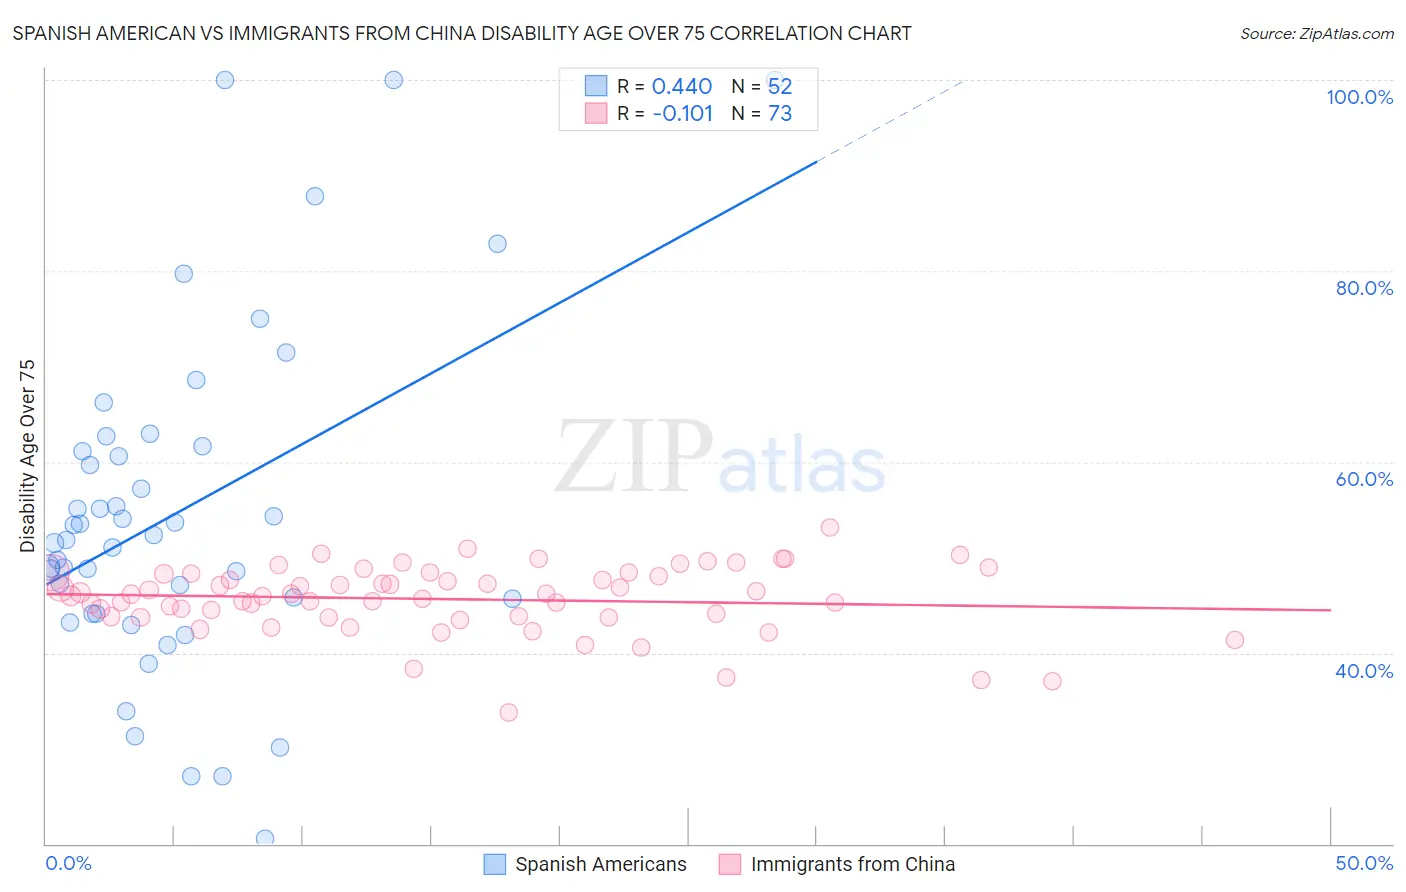 Spanish American vs Immigrants from China Disability Age Over 75